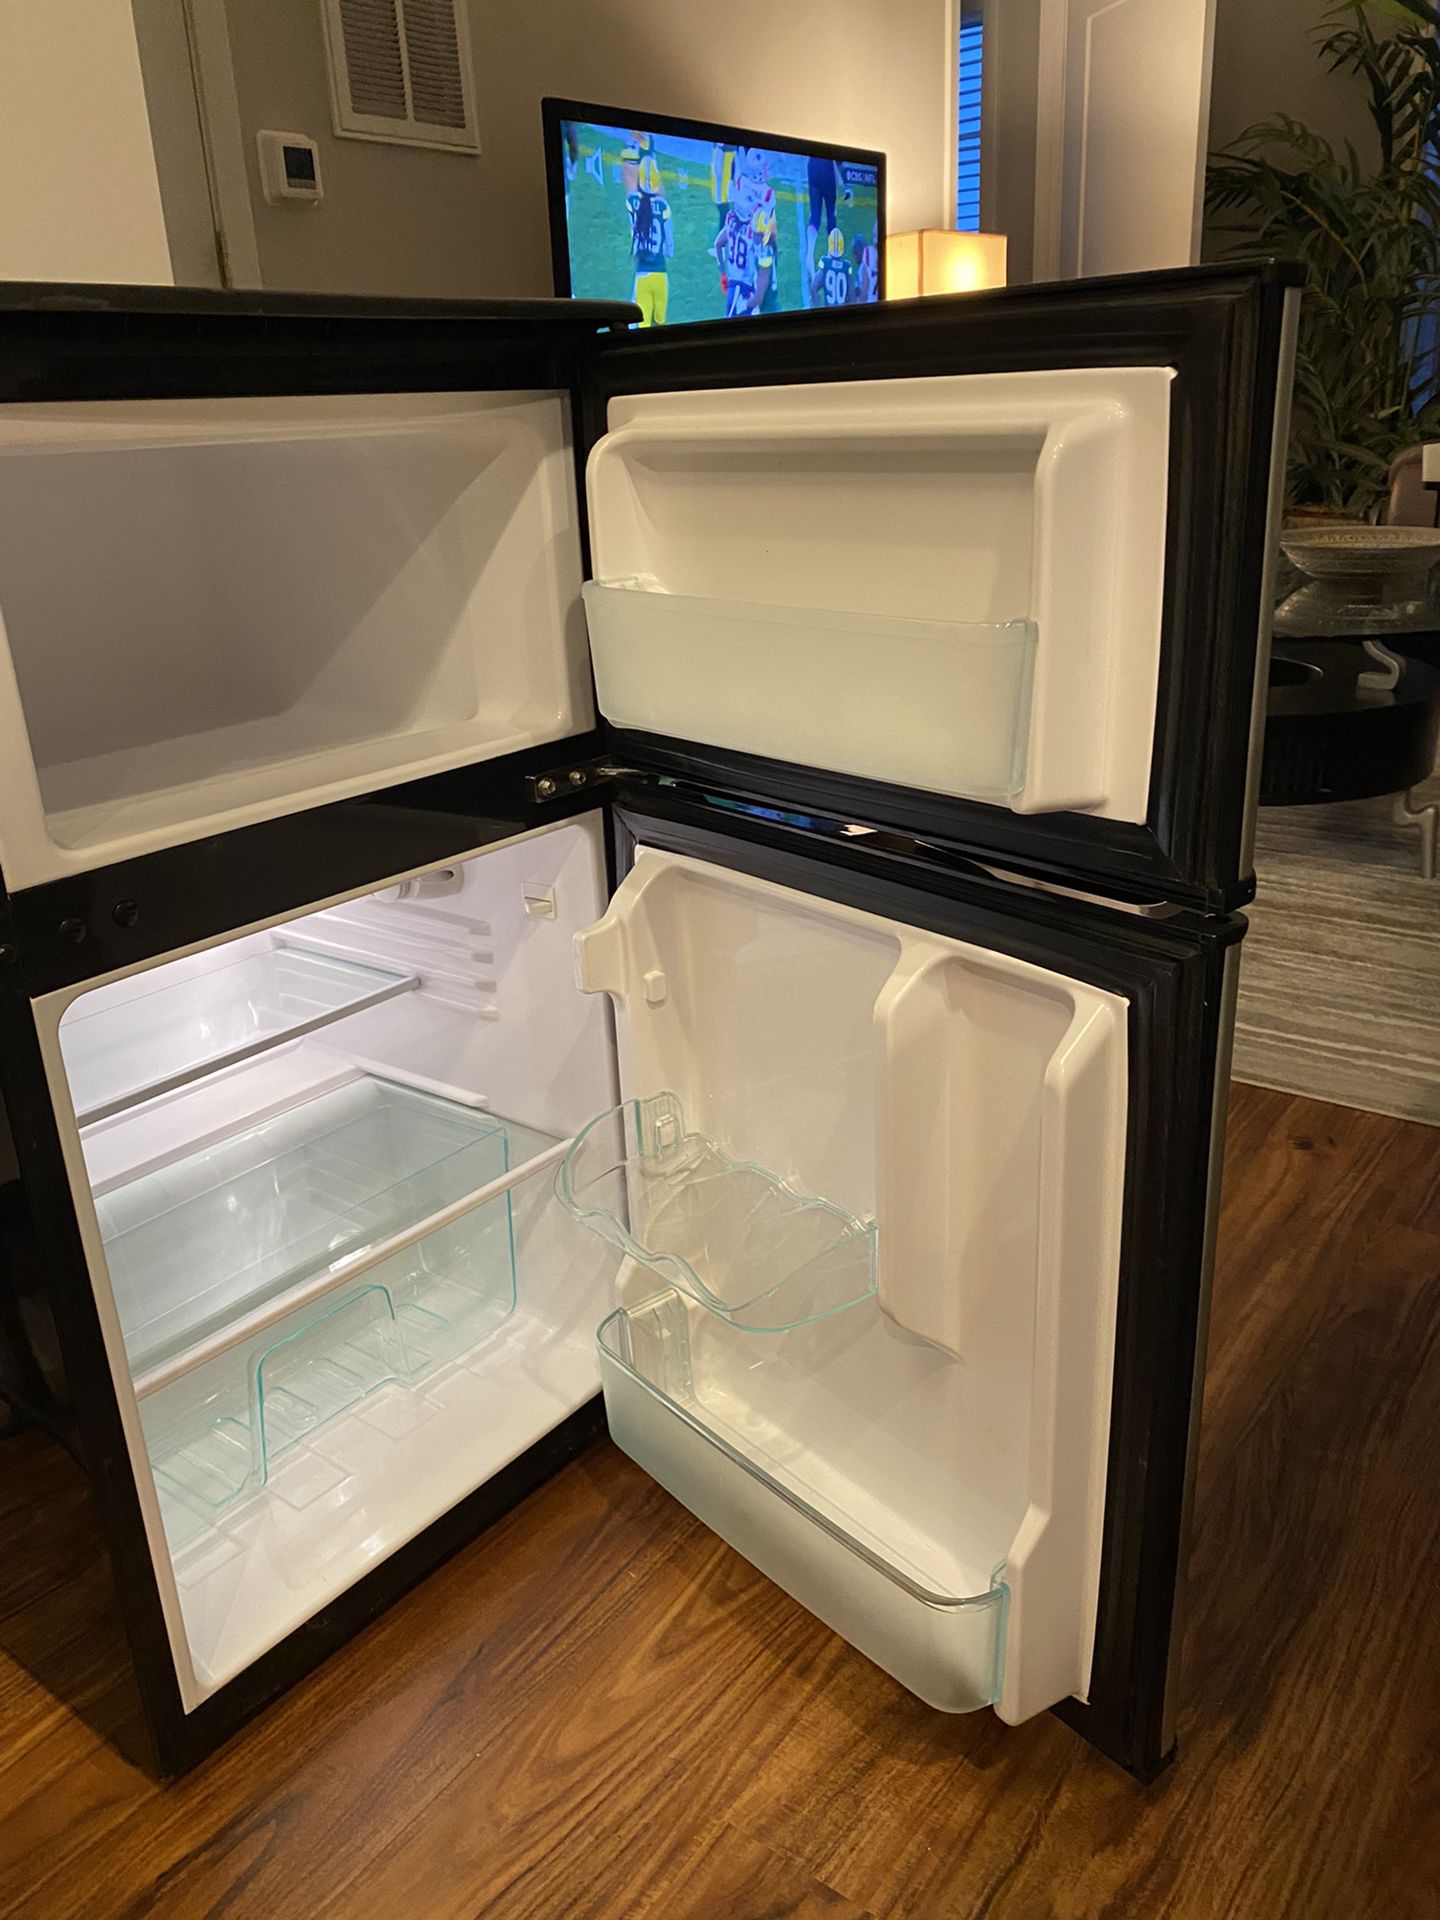 Mini Fridge With Attached Separate Freezer